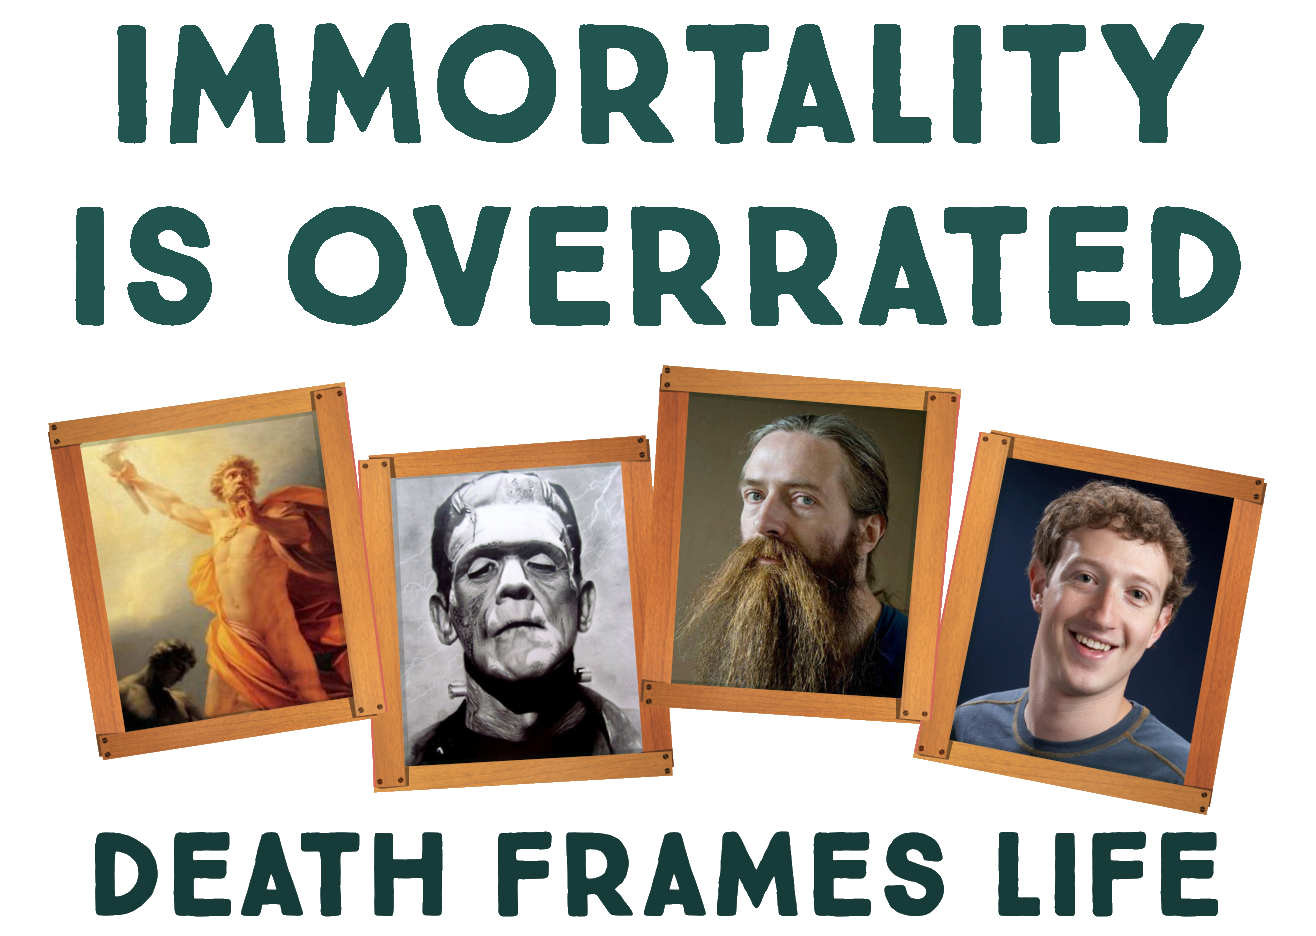 Immortality is overrated